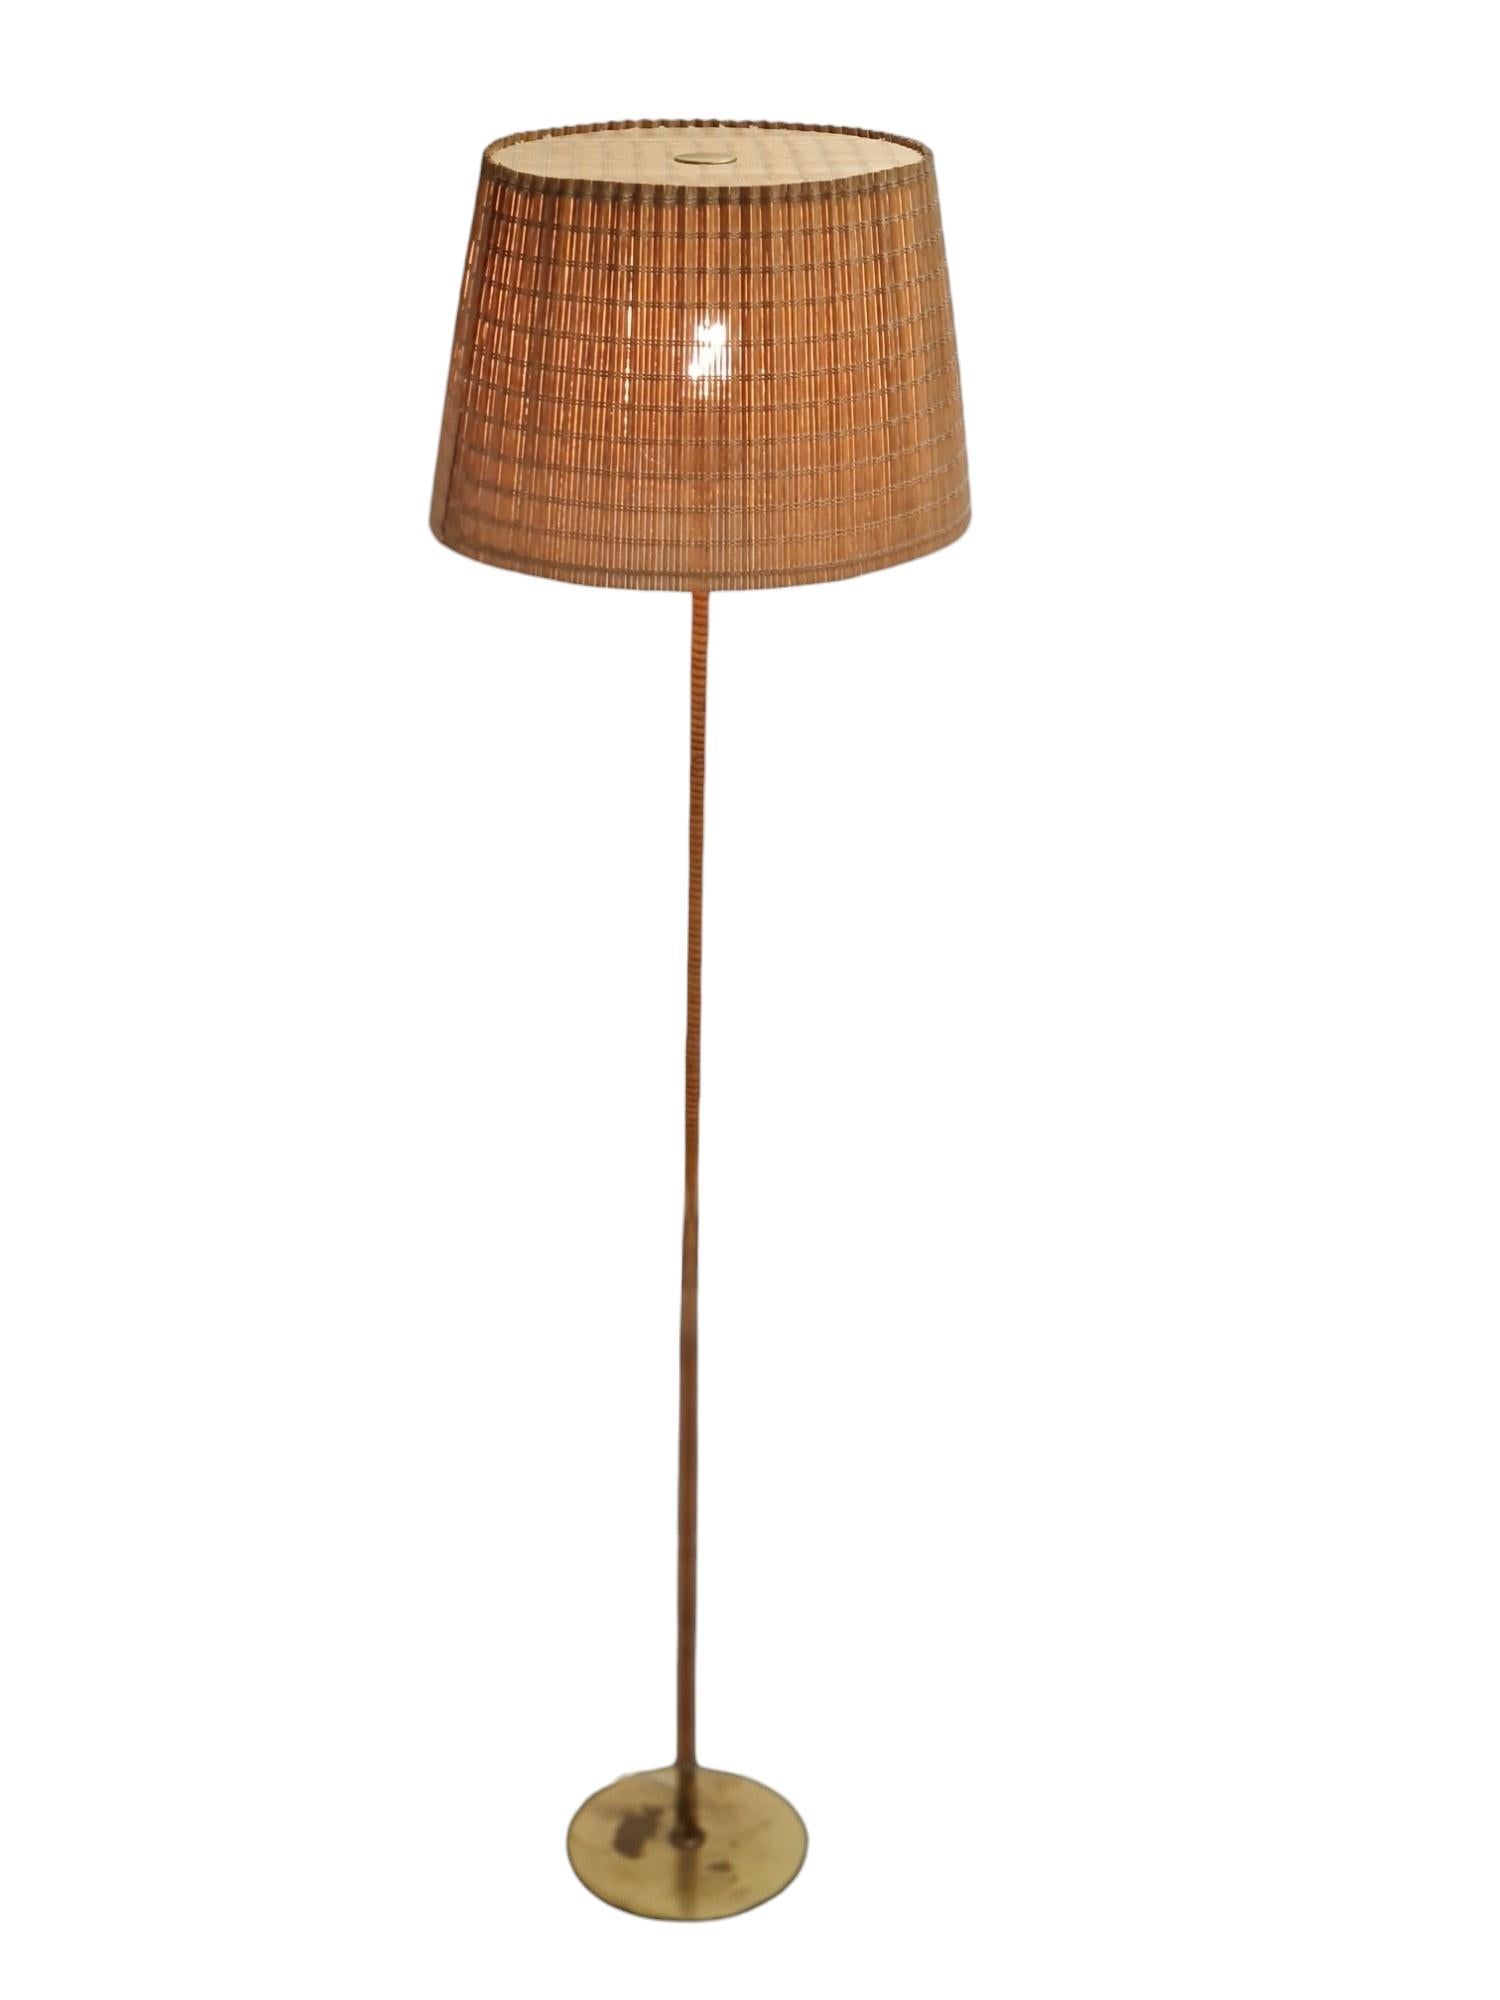 Lampadaire Paavo Tynell modèle 9627, Taito Oy  en vente 2